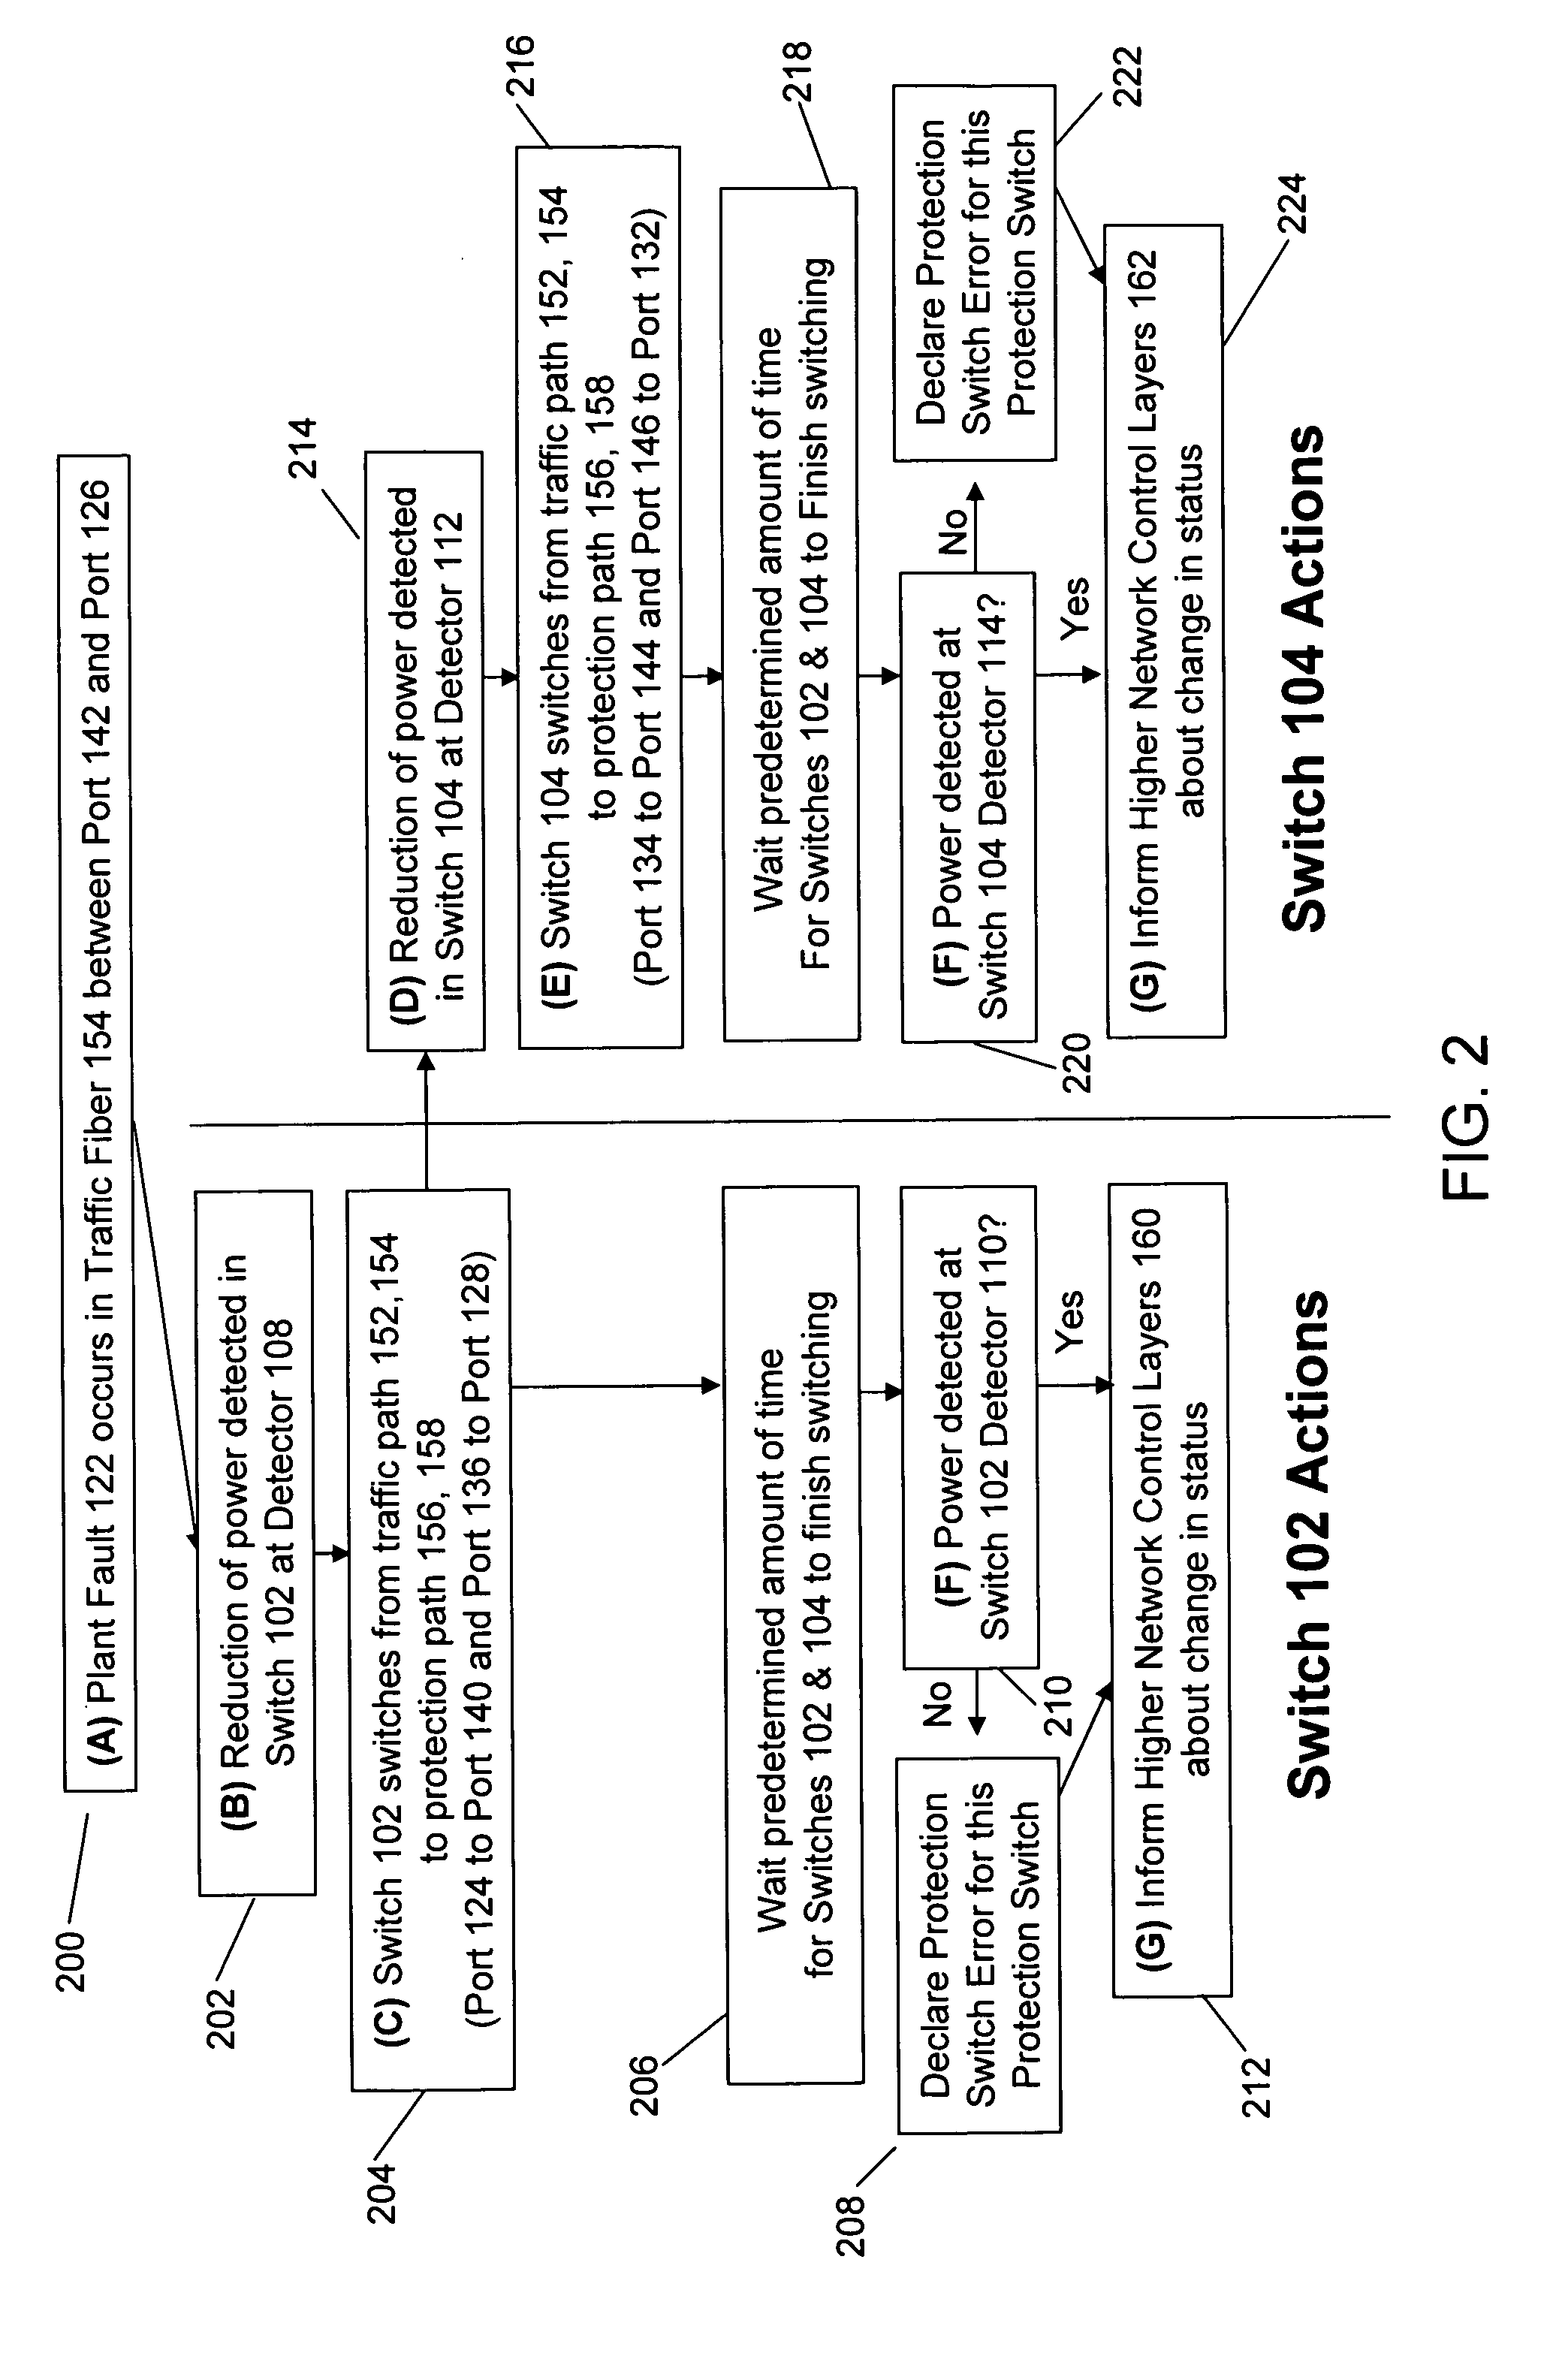 Method and apparatus for network fault detection and protection switching using optical switches with integrated power detectors